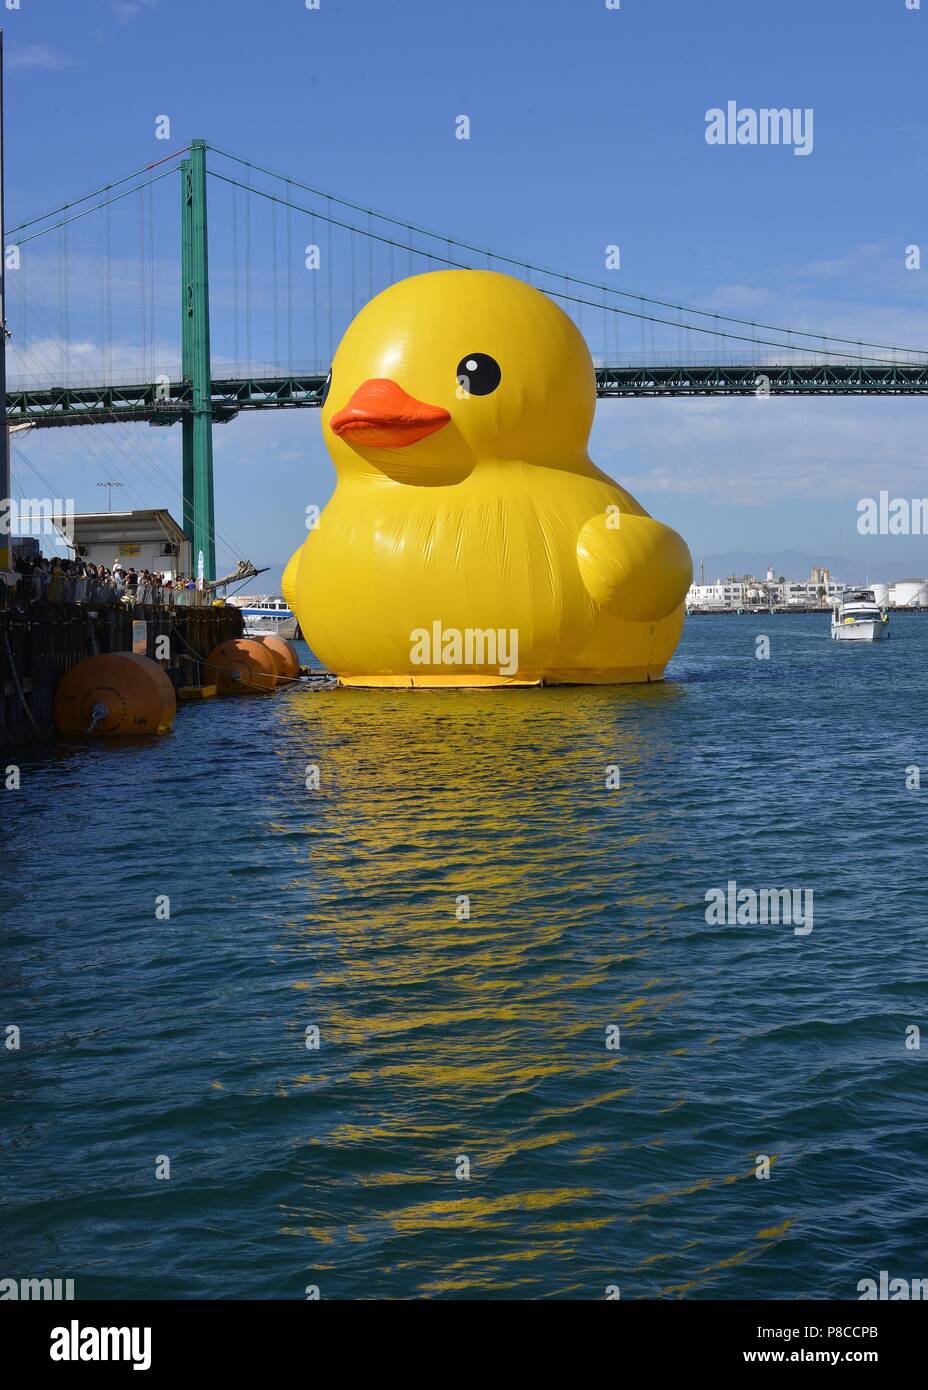 San Pedro, California, USA. 24th Aug, 2014. The Tall Ships Festival kicked off in the Port of Los Angeles Wednesday with the arrival of an unusual guest - the world's largest rubber duck.The canary-yellow 61-foot-tall bathtub toy sailed into port crowded with ships and filled with admiring crowds eager to catch a glimpse of the iconic artwork. It will remain in the harbor through Sunday.Dutch artist Florentijn Hofman debuted the photogenic duck in 2007, and versions of it have been seen around the world in places including China, Hong Kong, Belgium, Japan and New Zealand. (Credit Image: © B Stock Photo